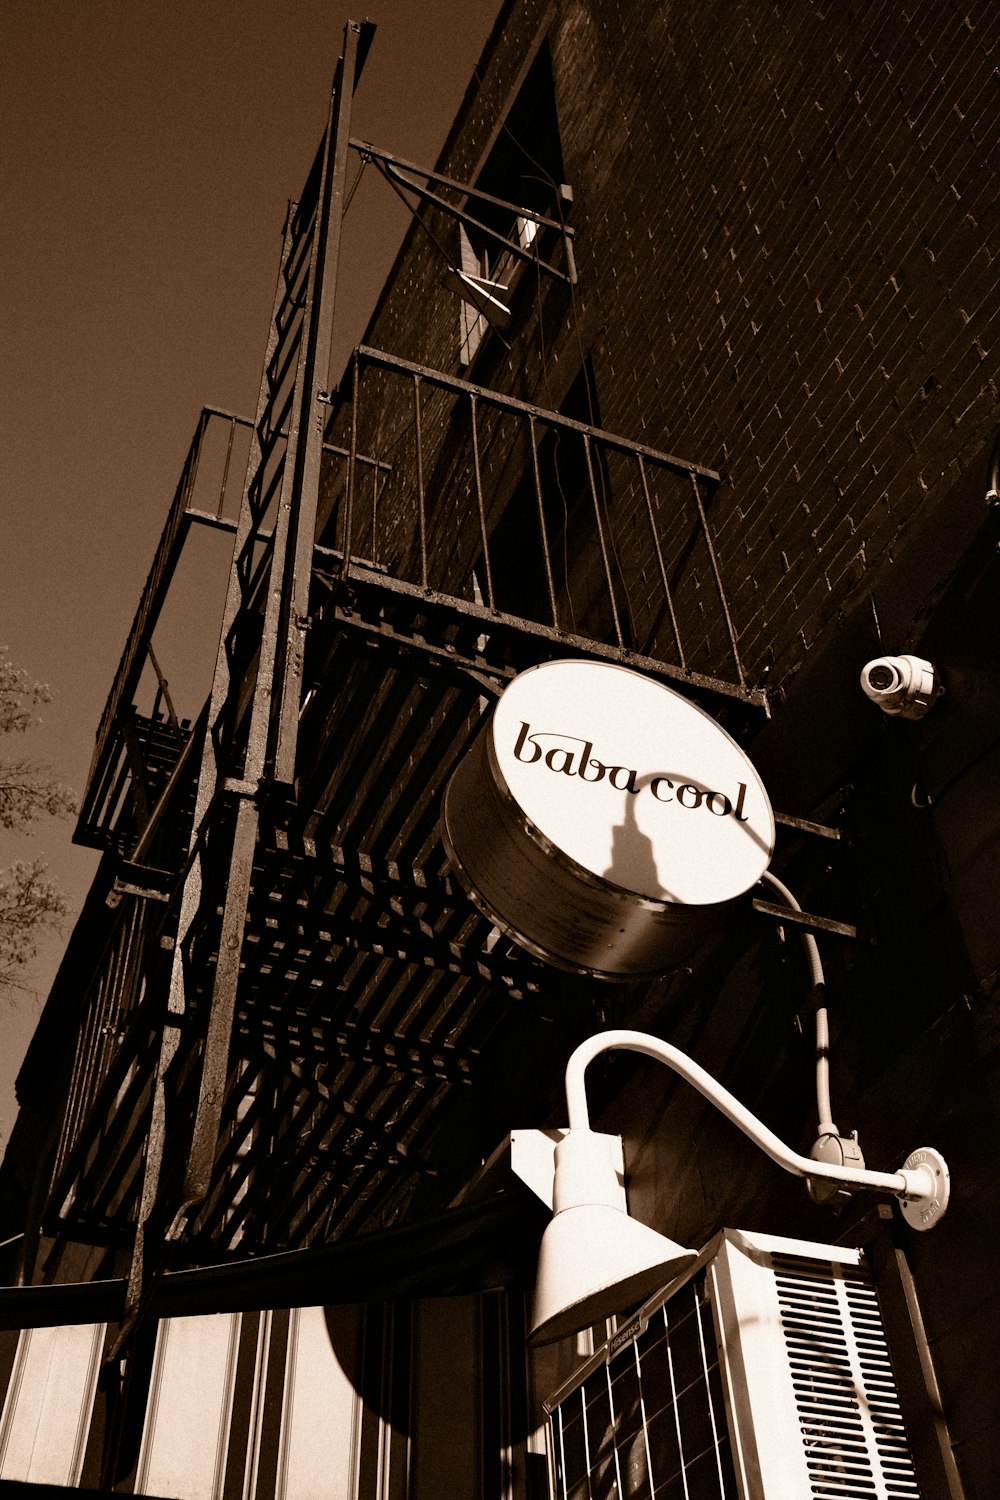 a black and white photo of a pub sign